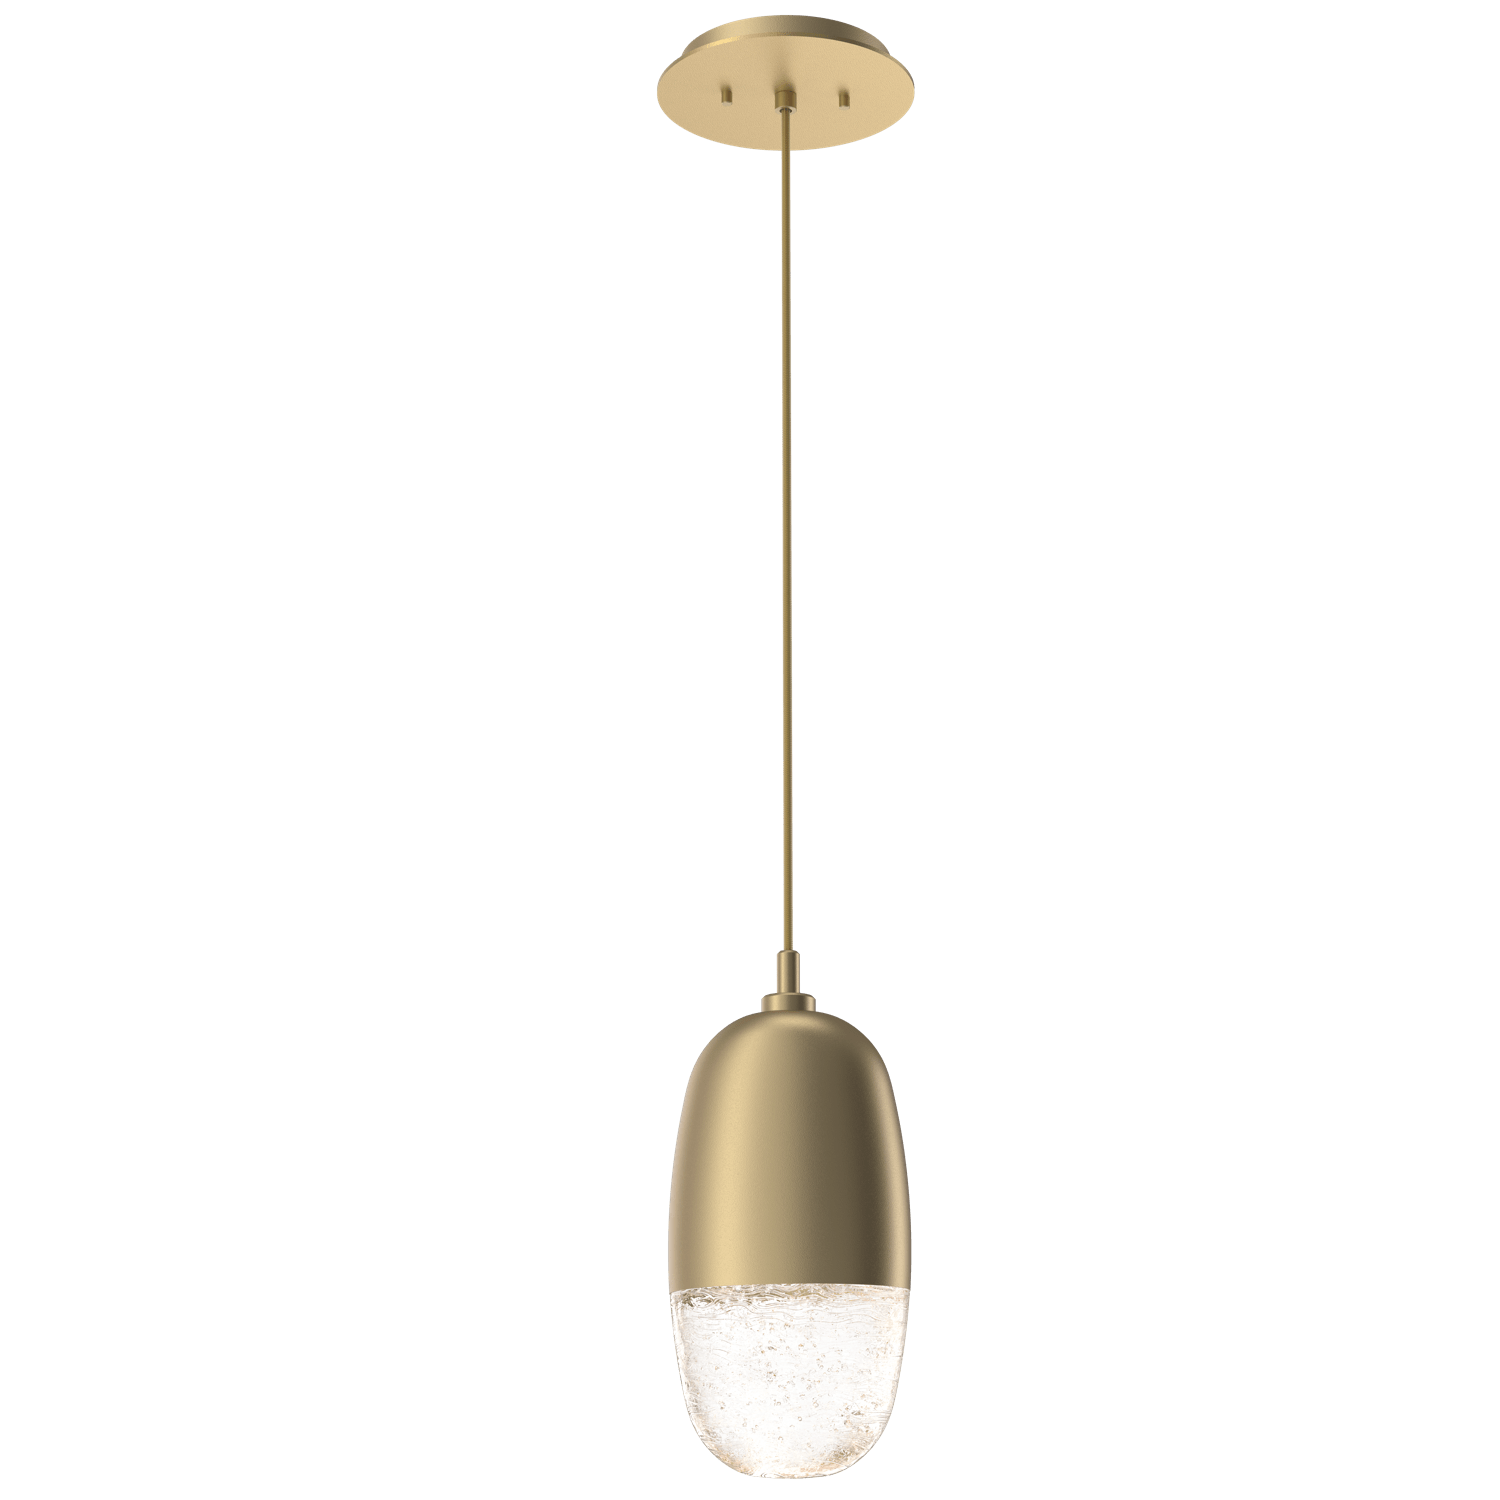 LAB0079-01-GB-Hammerton-Studio-Pebble-pendant-light-with-gilded-brass-finish-and-clear-cast-glass-shades-and-LED-lamping